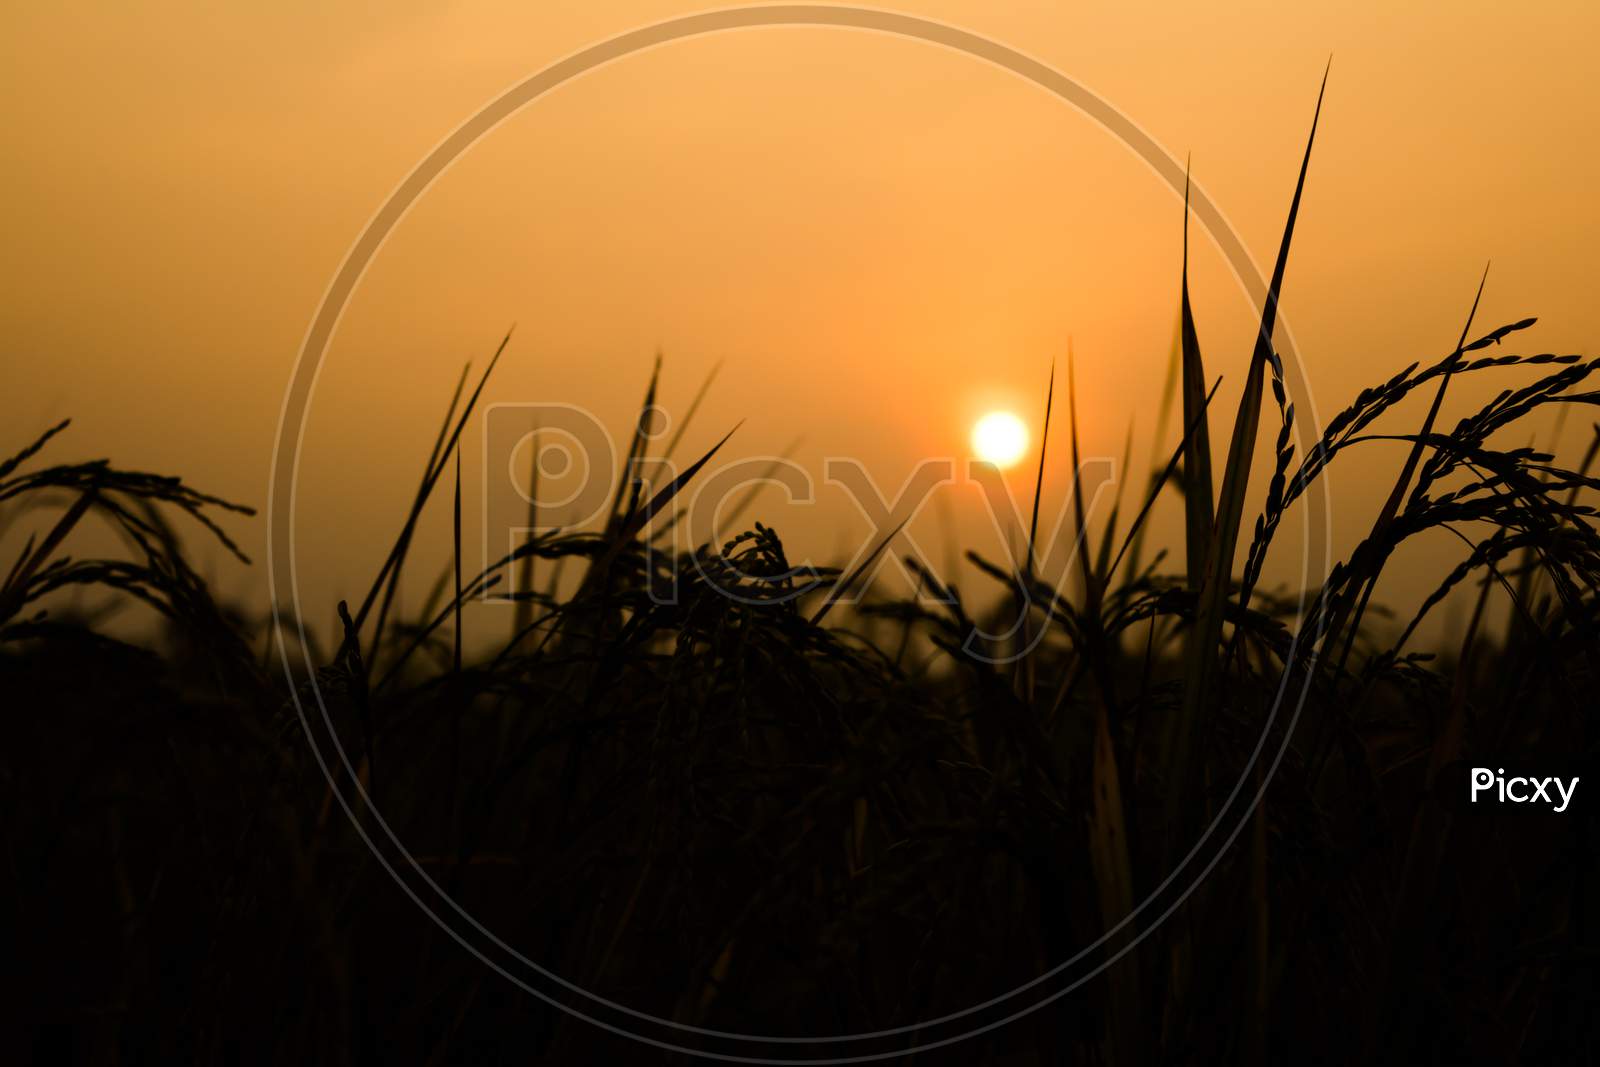 Rural landscape with a field of wheat and sunrise with a cloudy sky background. Landscape.